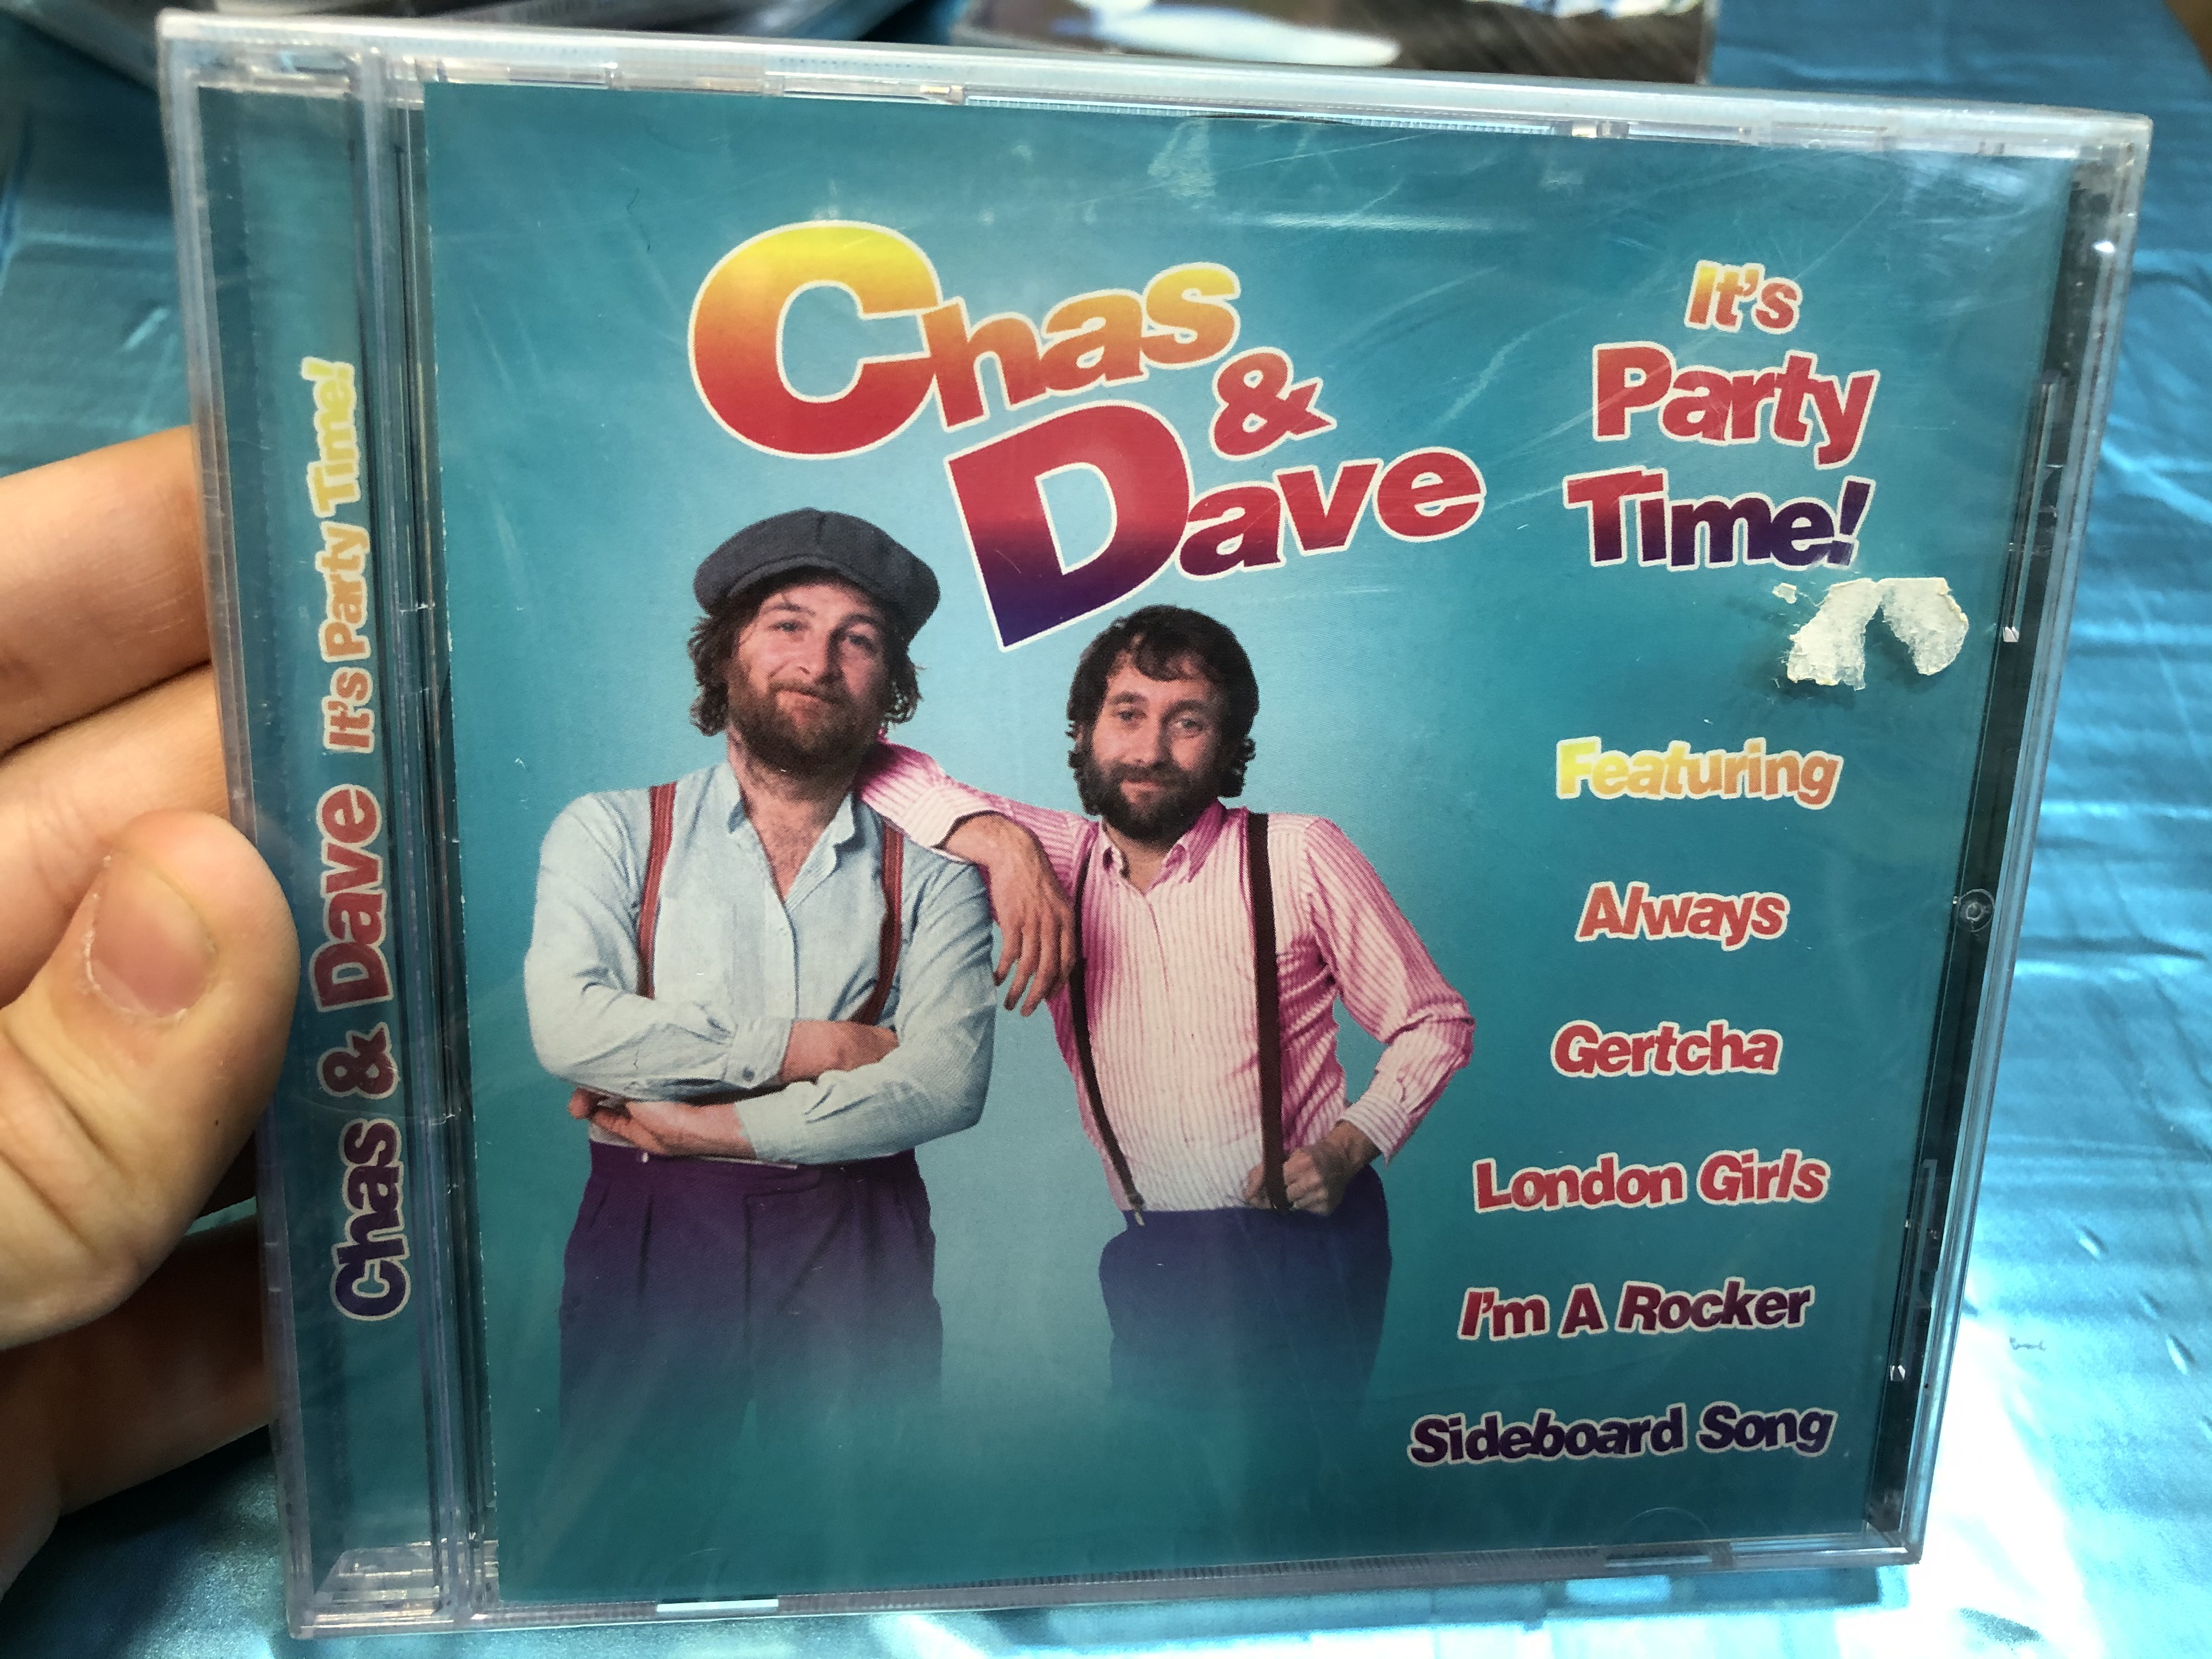 chas-dave-it-s-party-time-featuring-always-gertcha-london-girls-i-m-a-rocker-sideboard-song-time-music-audio-cd-tmi337-1-.jpg